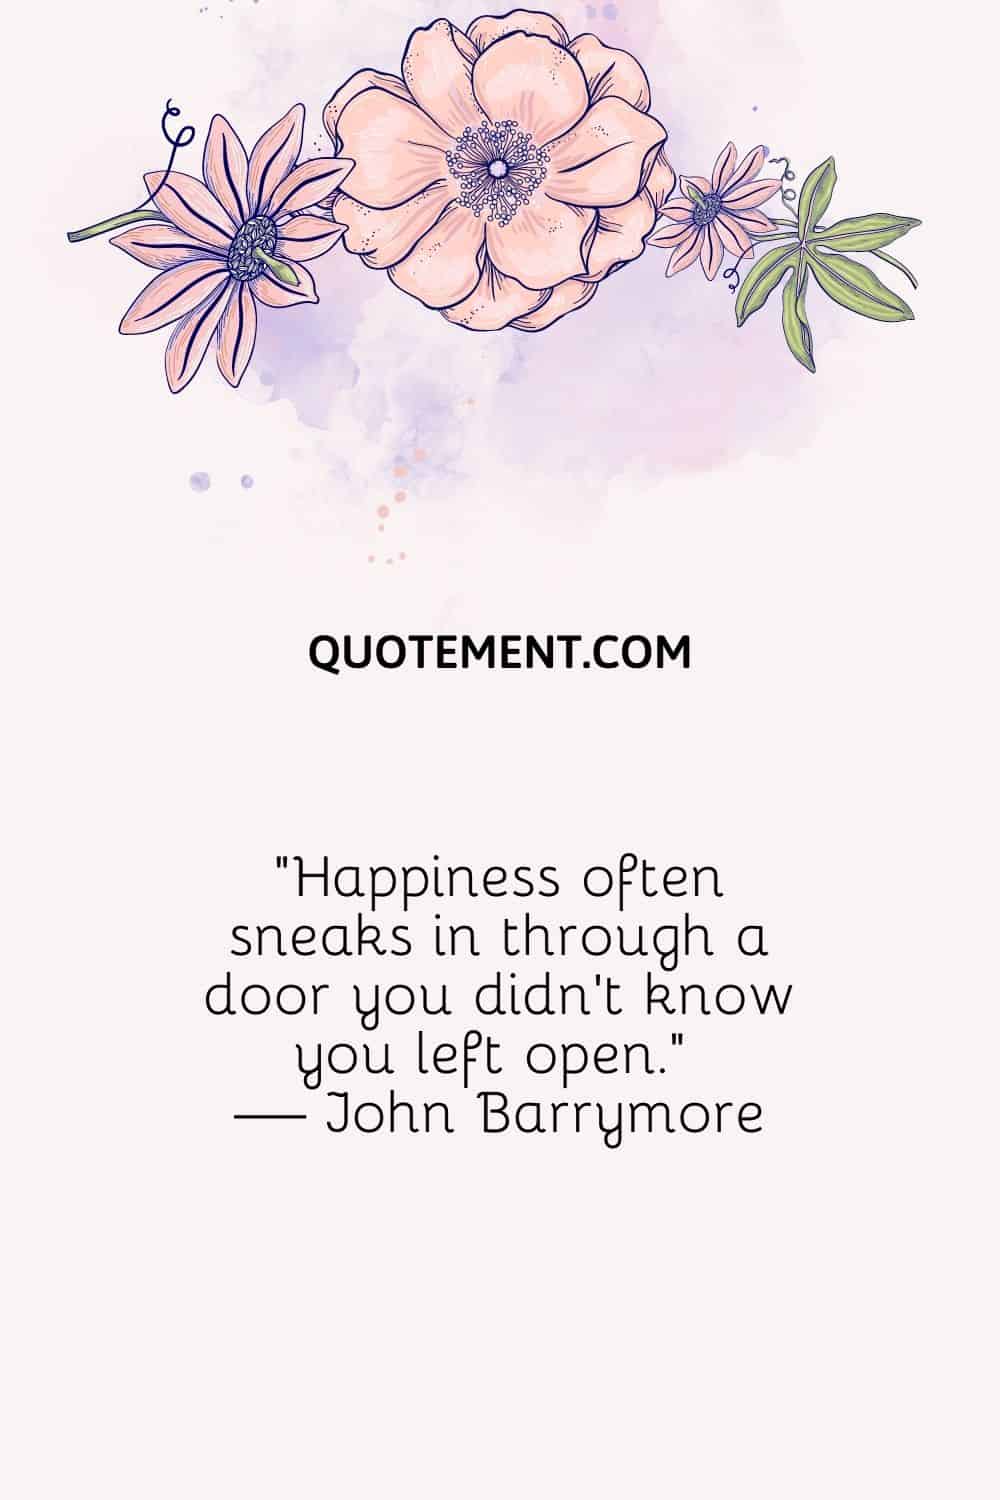 Happiness often sneaks in through a door you didn't know you left open. — John Barrymore